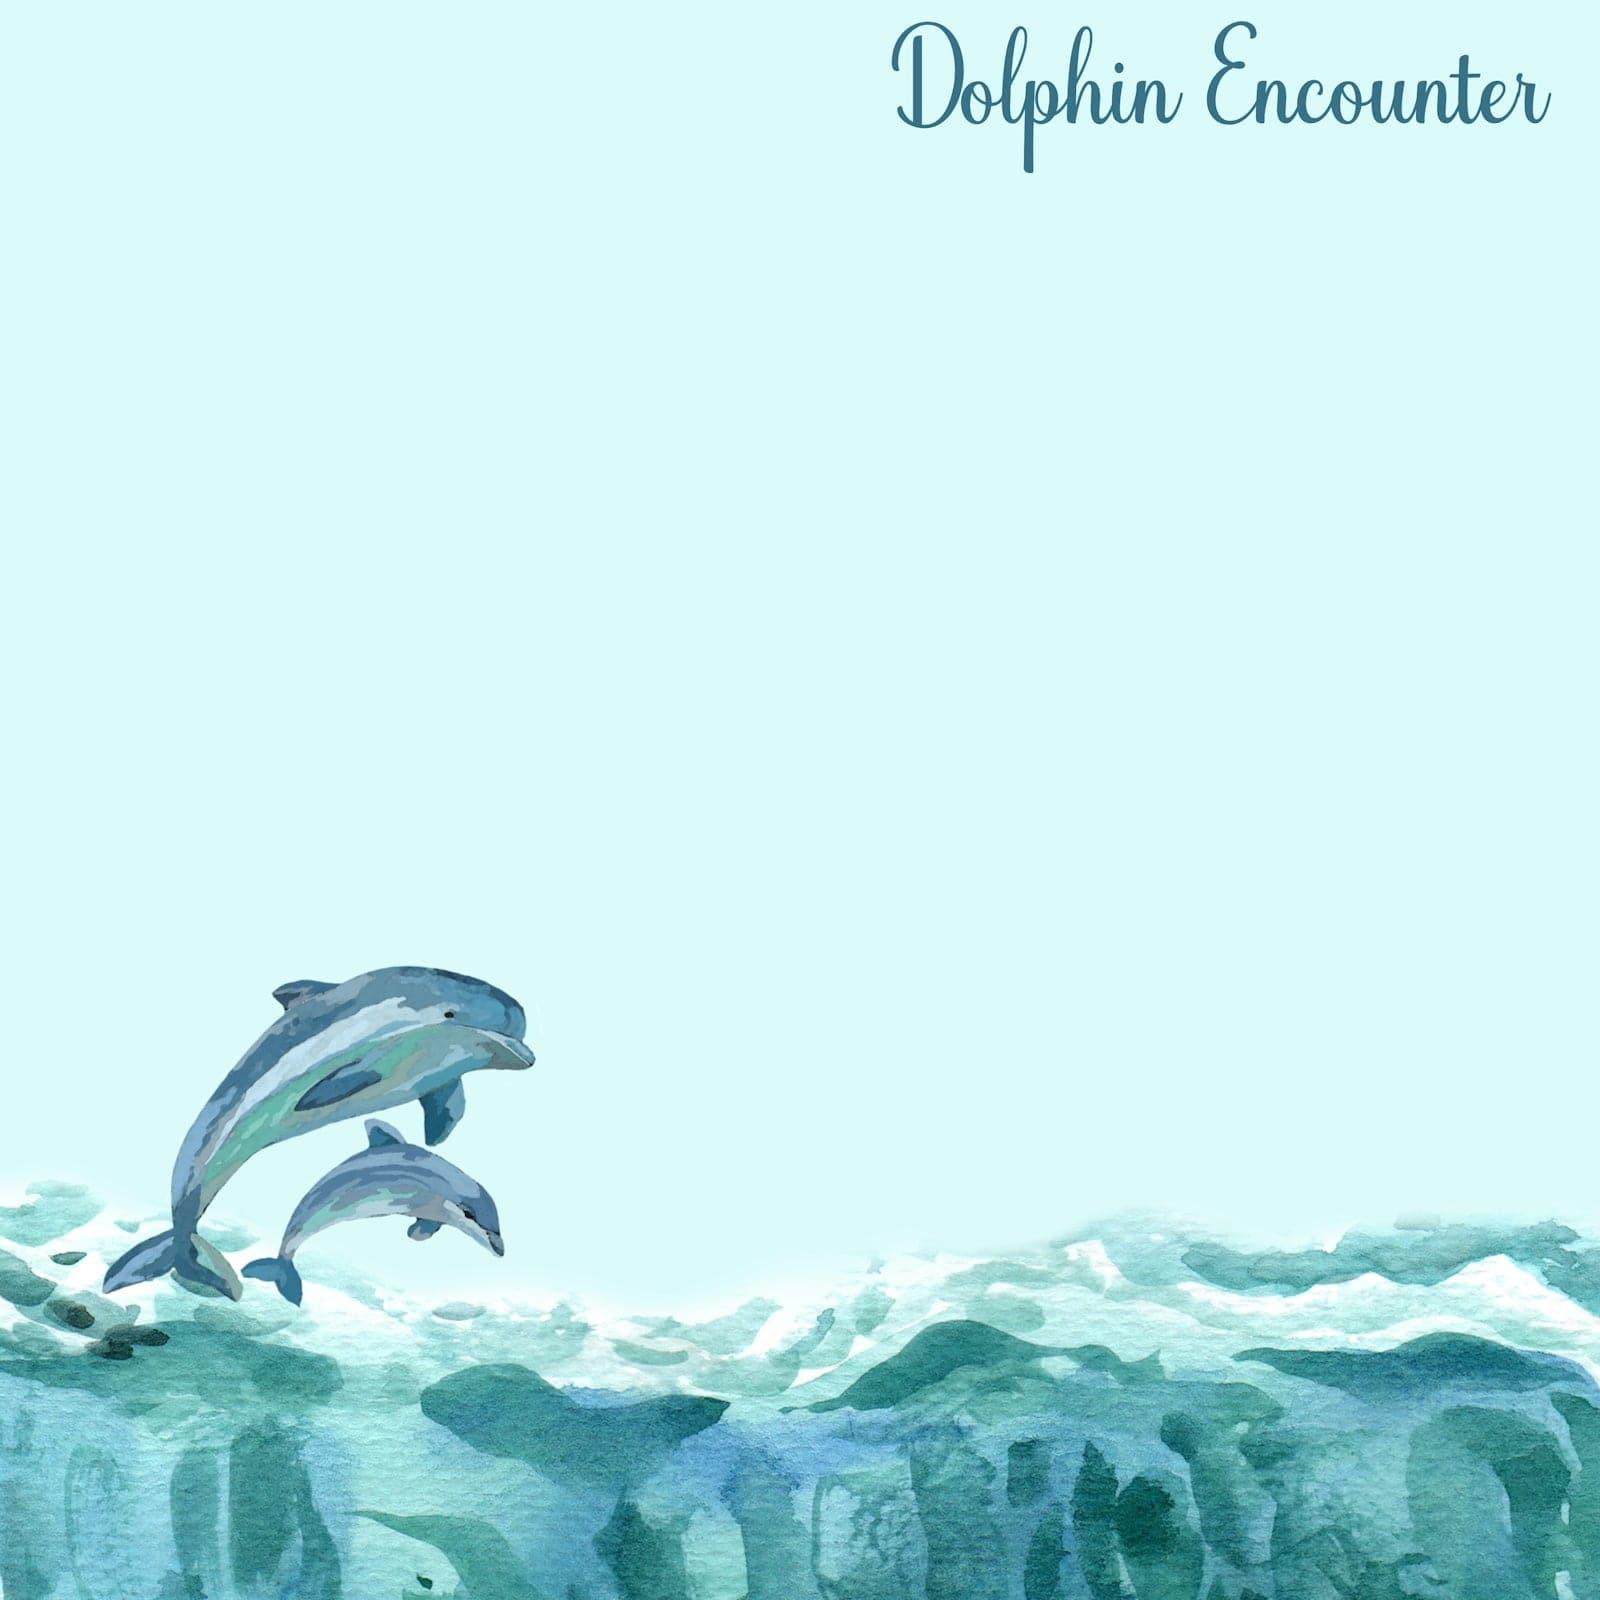 Underwater Collection Dolphin Encounter 12 x 12 Double-Sided Scrapbook Paper by SSC Designs - Scrapbook Supply Companies